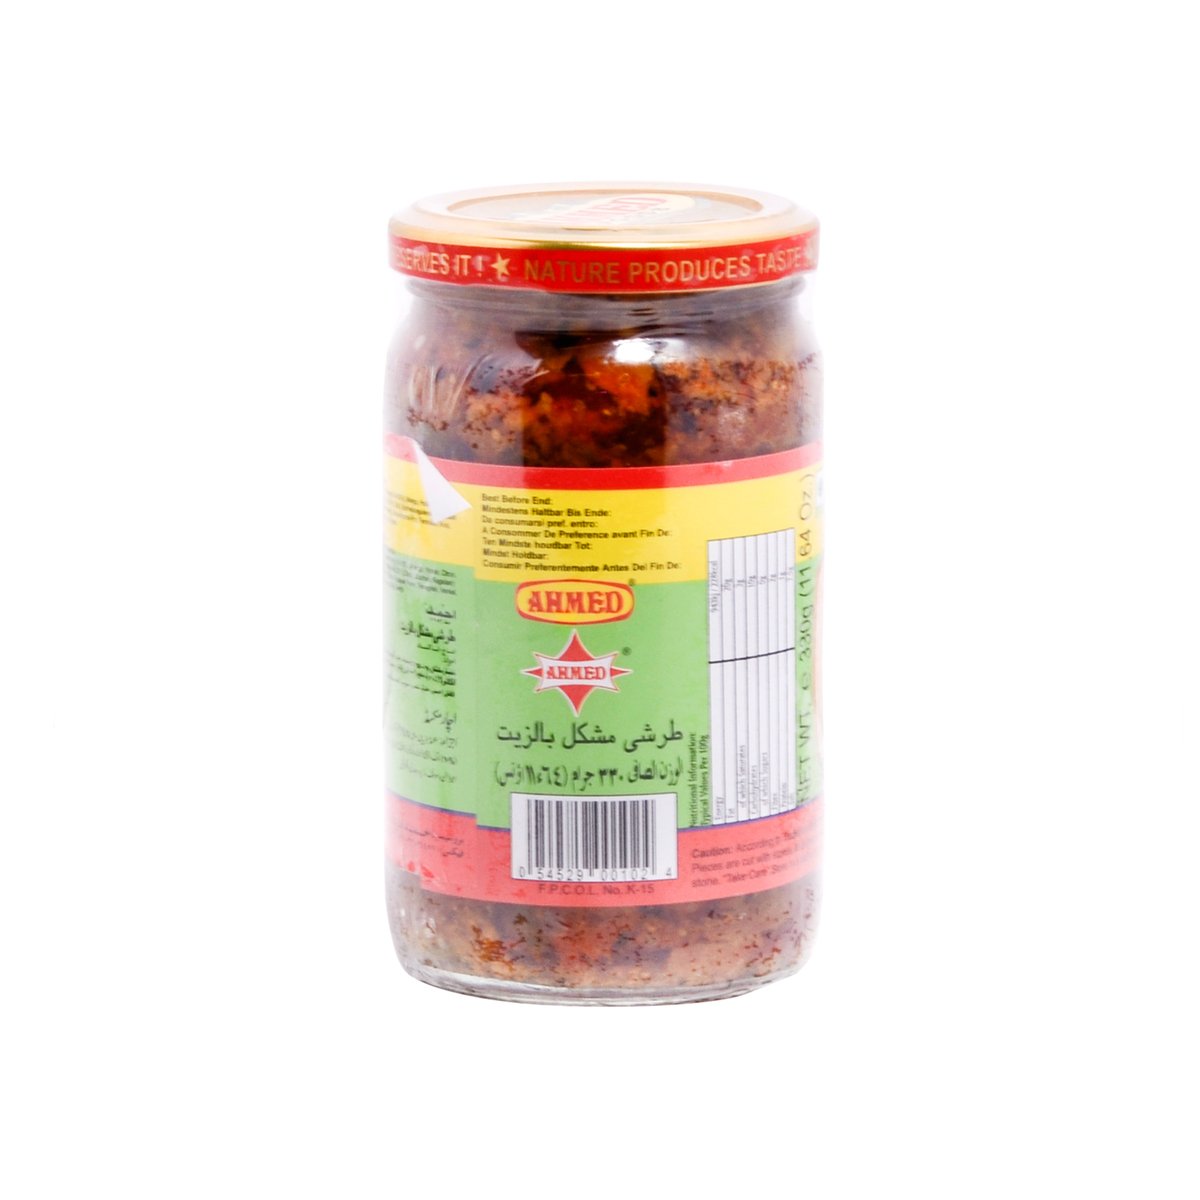 Ahmed Mixed Pickle in Oil 330 g